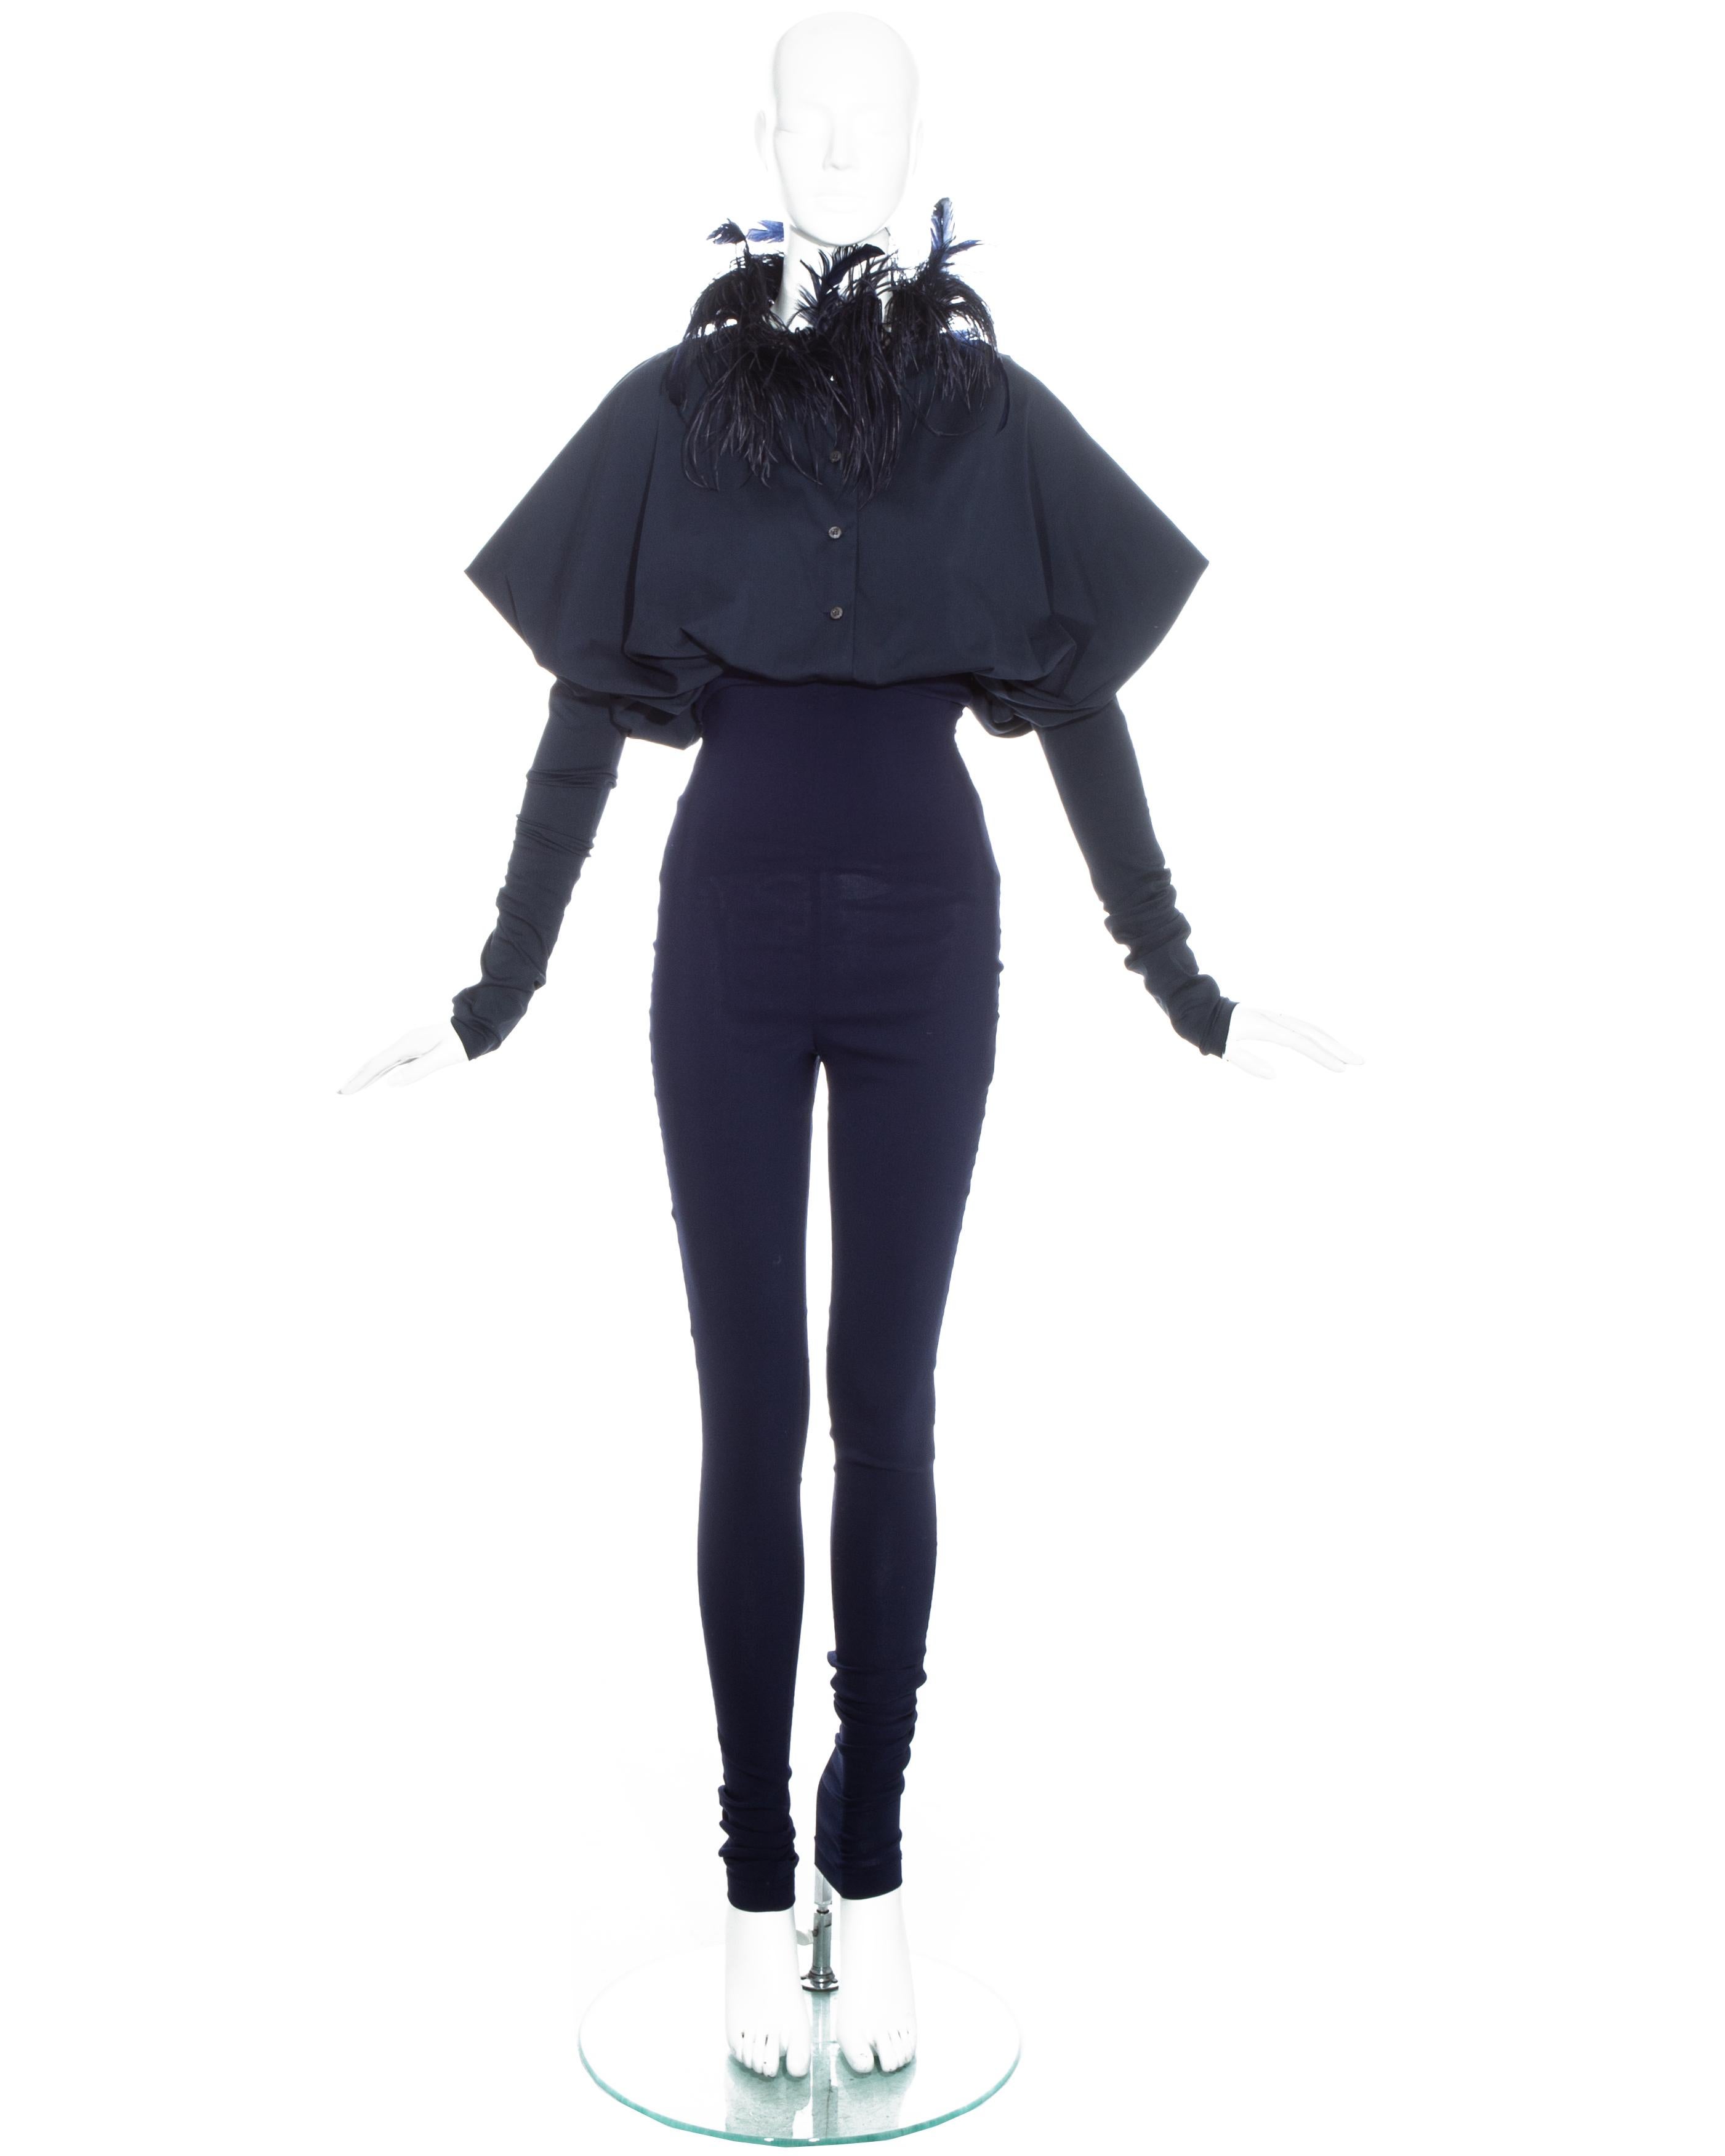 Dolce & Gabbana navy cotton spandex pant suit comprising: wide cut button up blouse with fitted sleeves and feathered collar, and fitted high waisted pants. 

Fall-Winter 1990